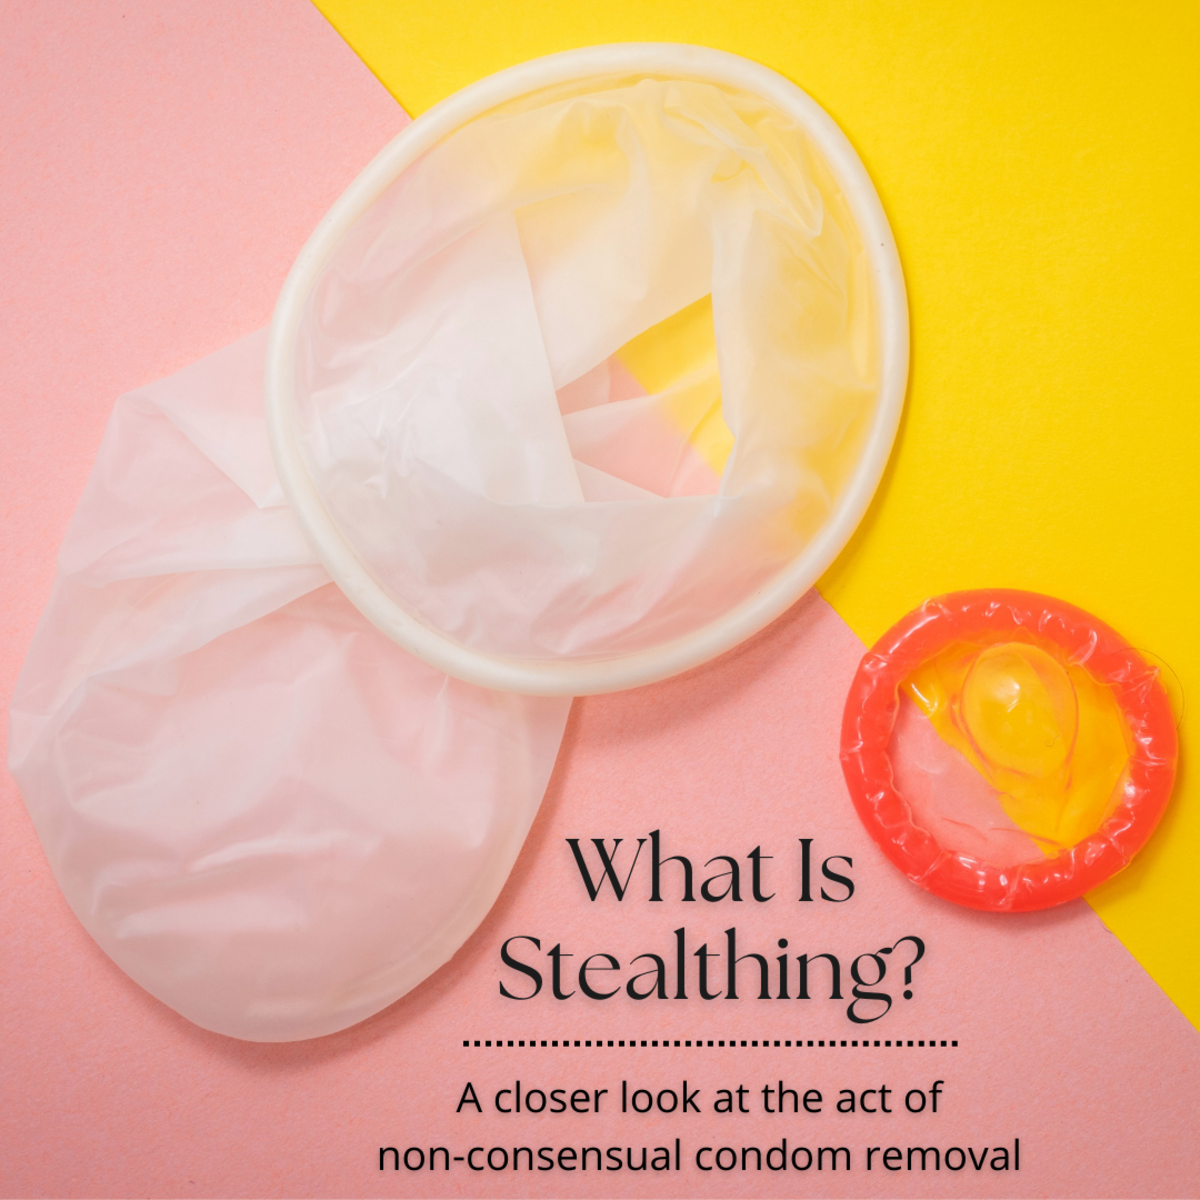 This article will take a deeper look at the act of "stealthing"—non-consensually removing a condom during sex—and find out what some men think about it.